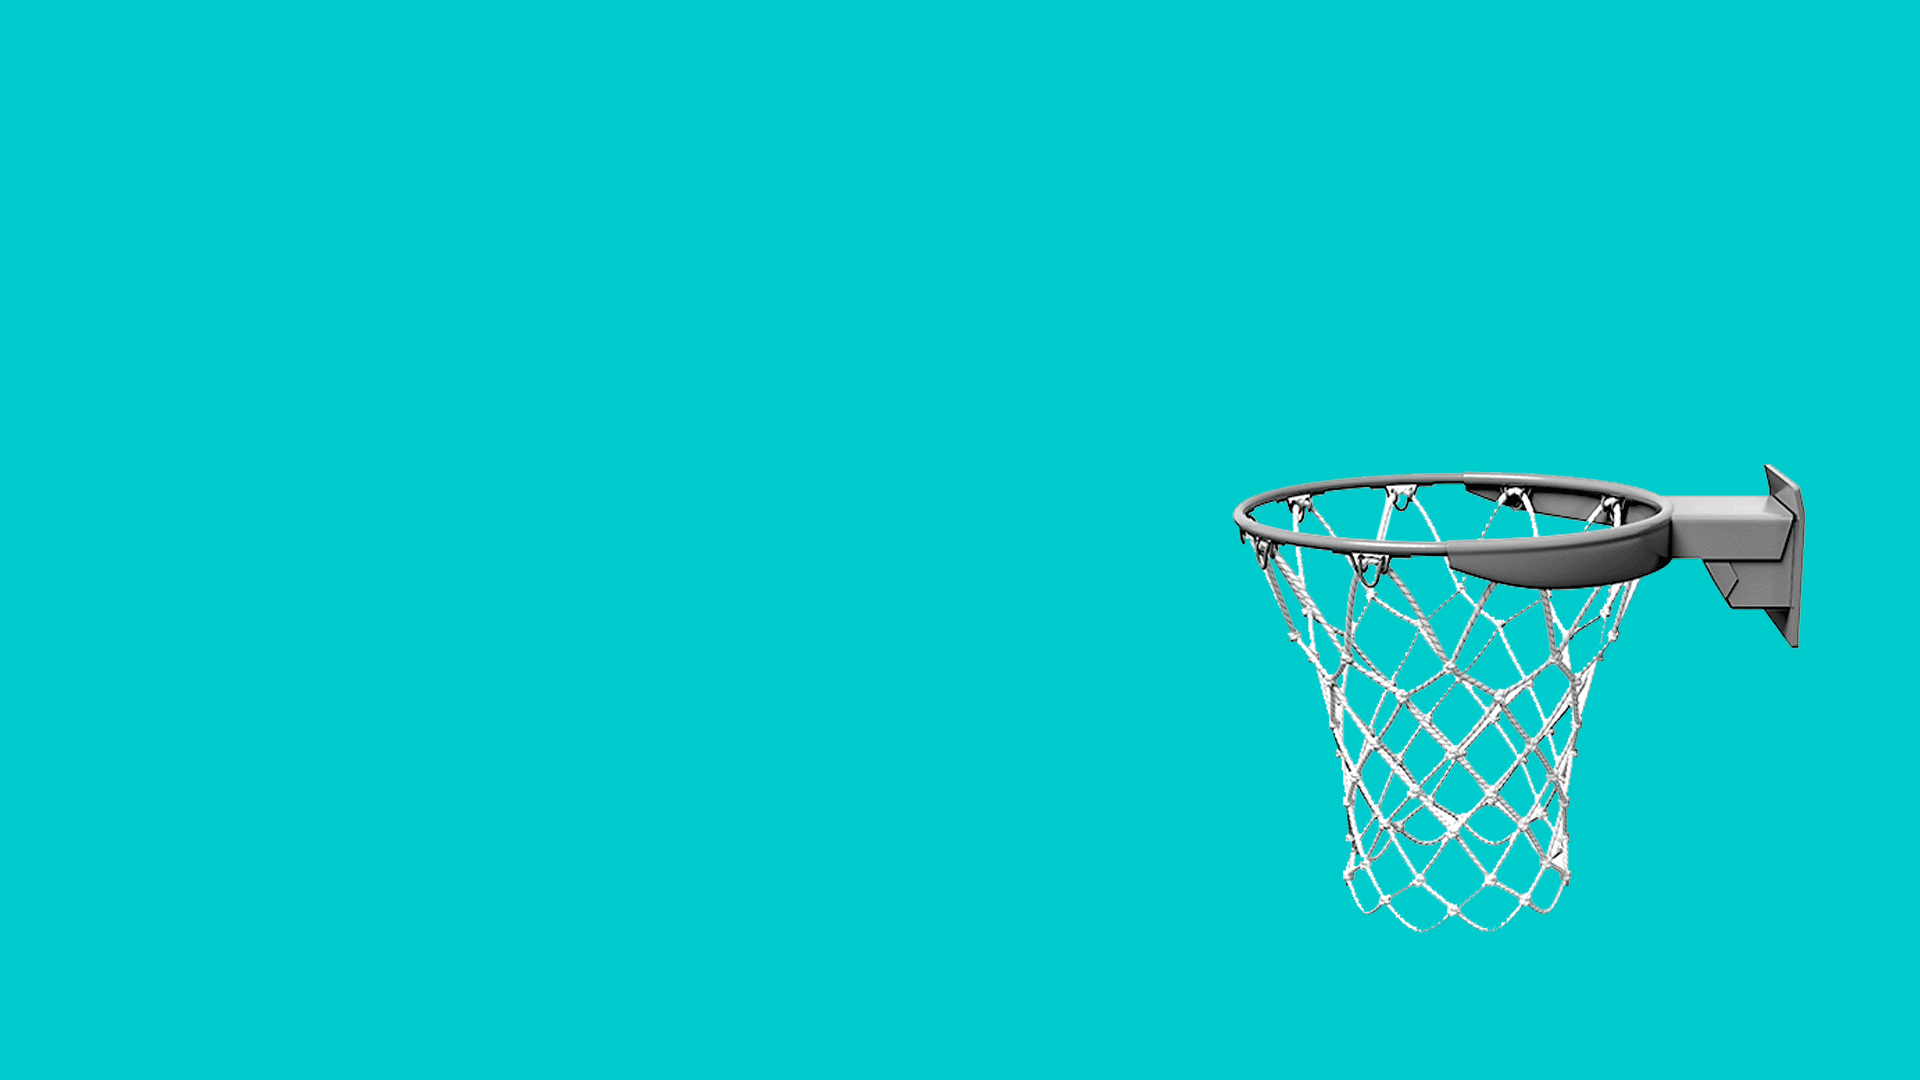 Animated illustration of a star going through a basketball net